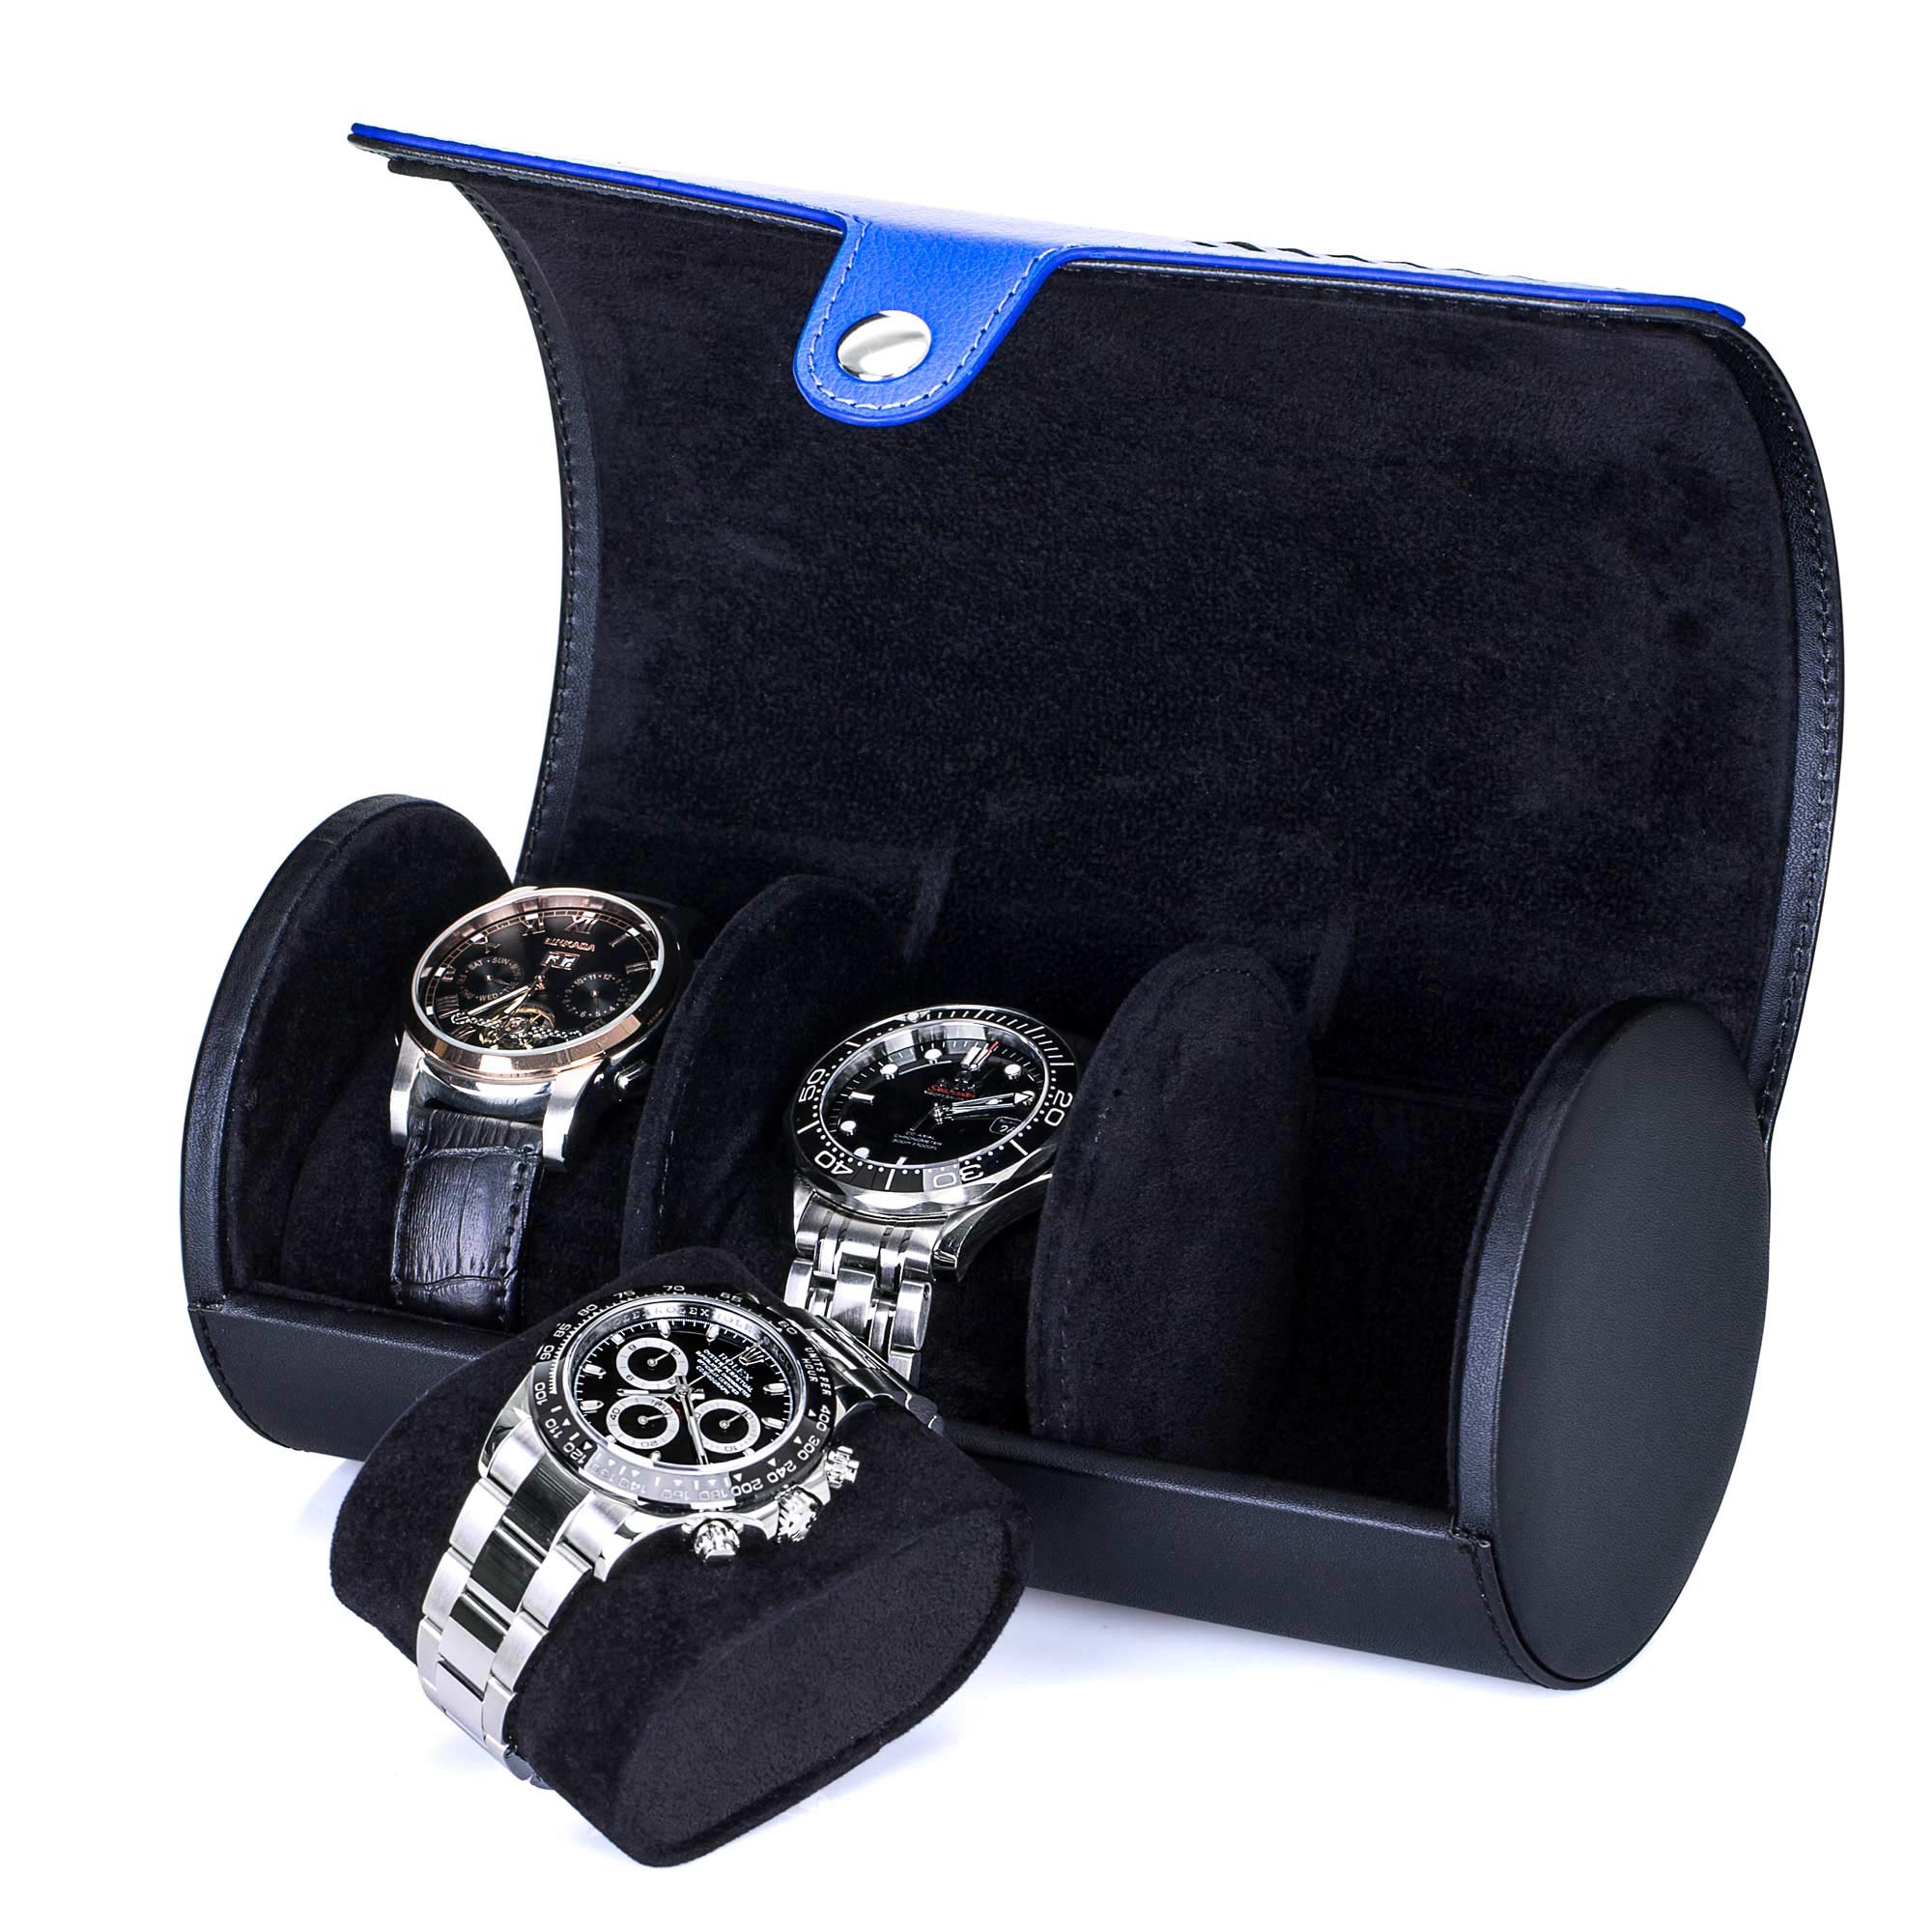 TRIPLE TREE Watch Roll, Travel Watch Case For 3 Watch, Travel Watch Box with Velvet Sections to Prevent Scratching or Impact (Black)